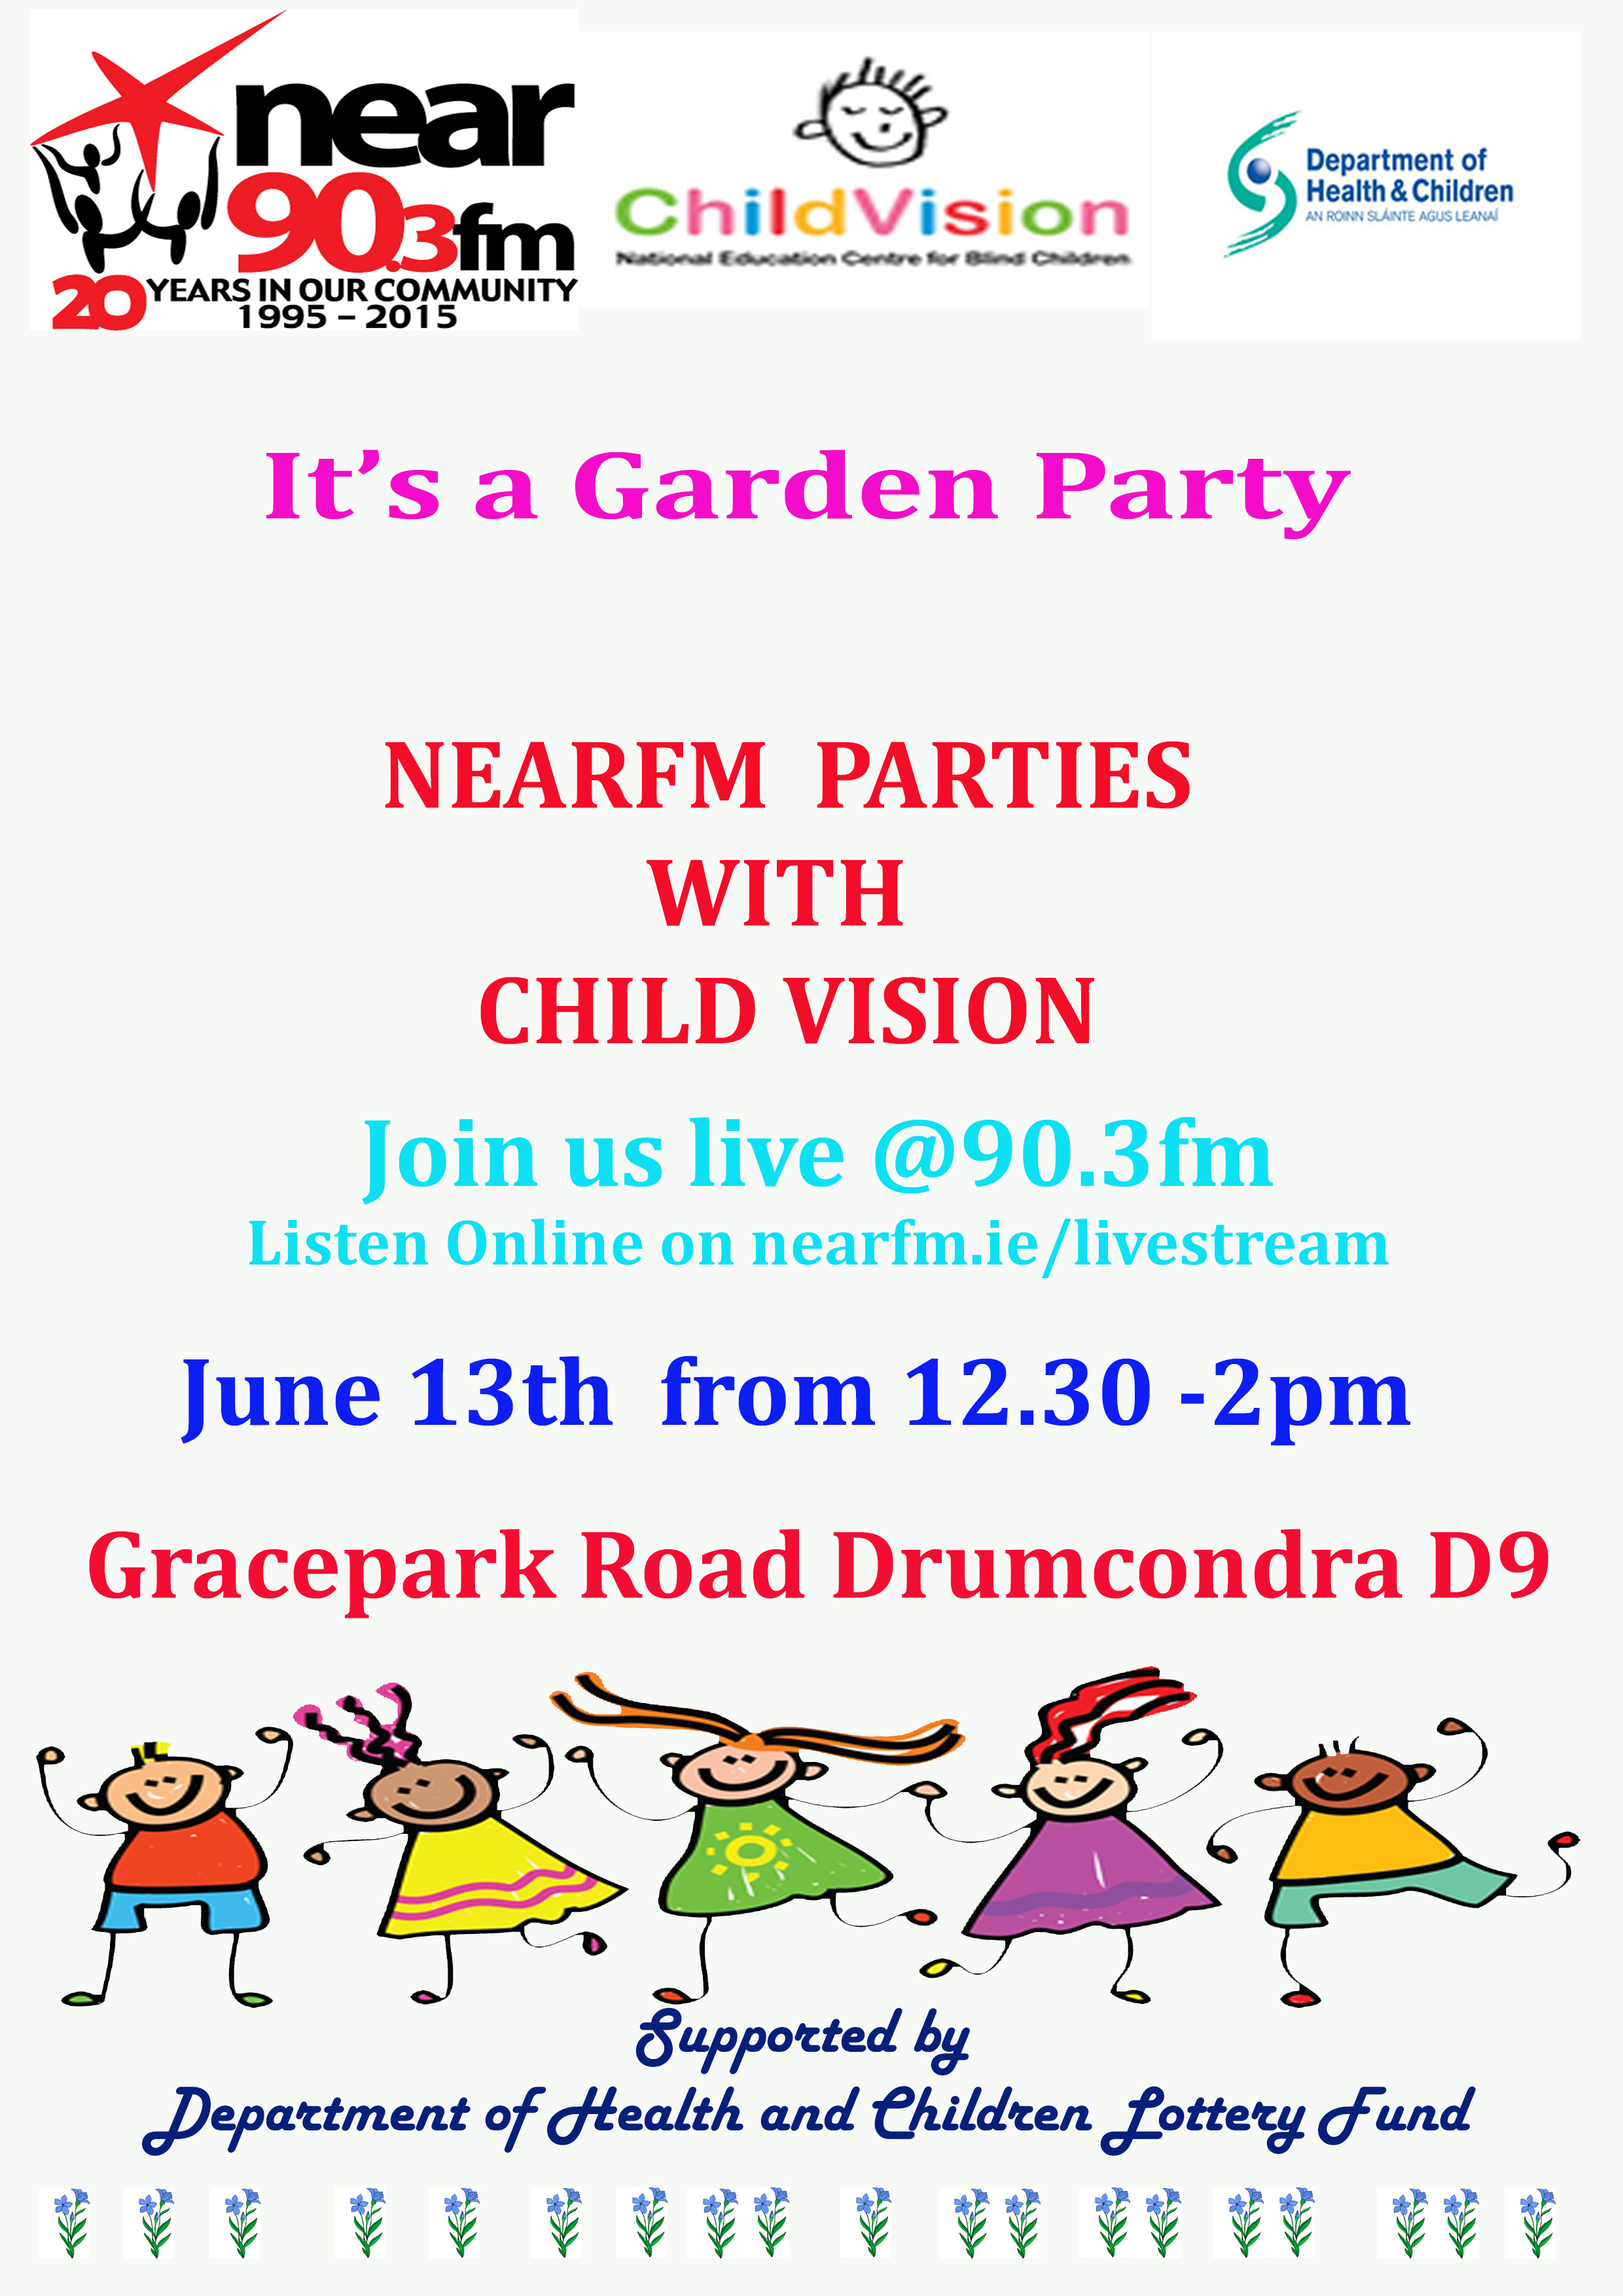 Visit Nearfm at Child Vision Garden Party Saturday  June 13th